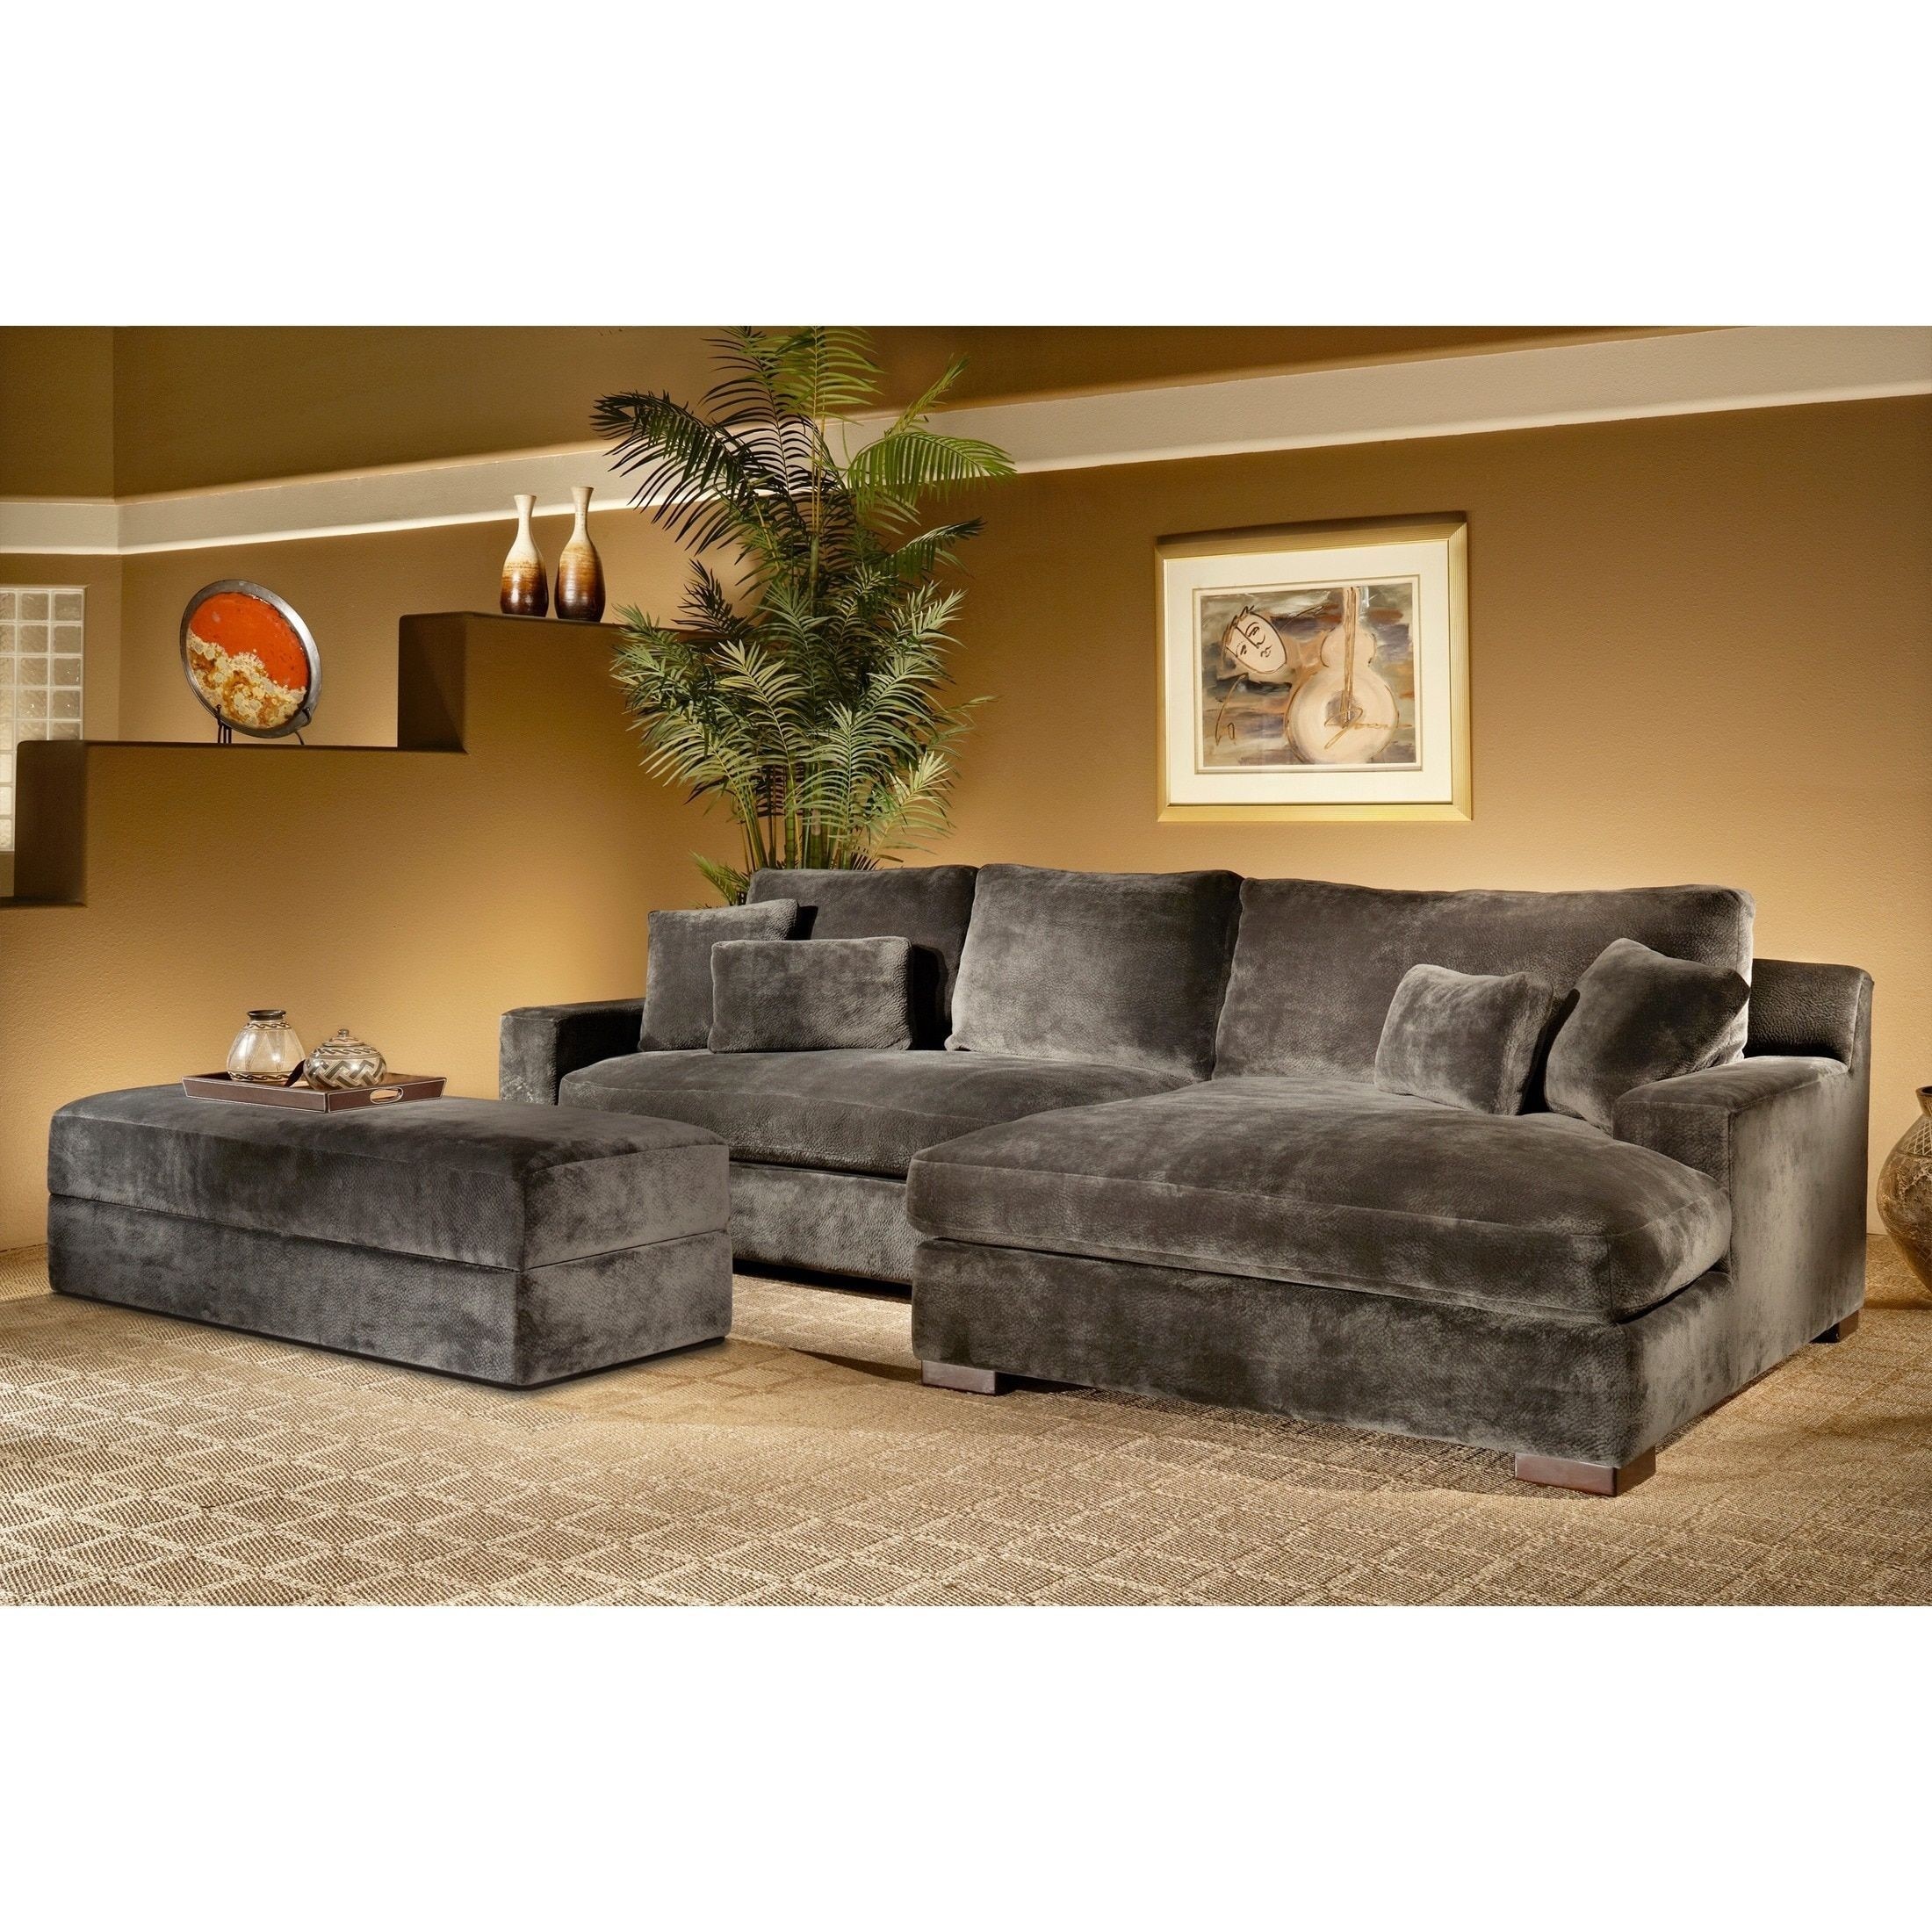 Sectional Sofas With Storage   Ideas on Foter